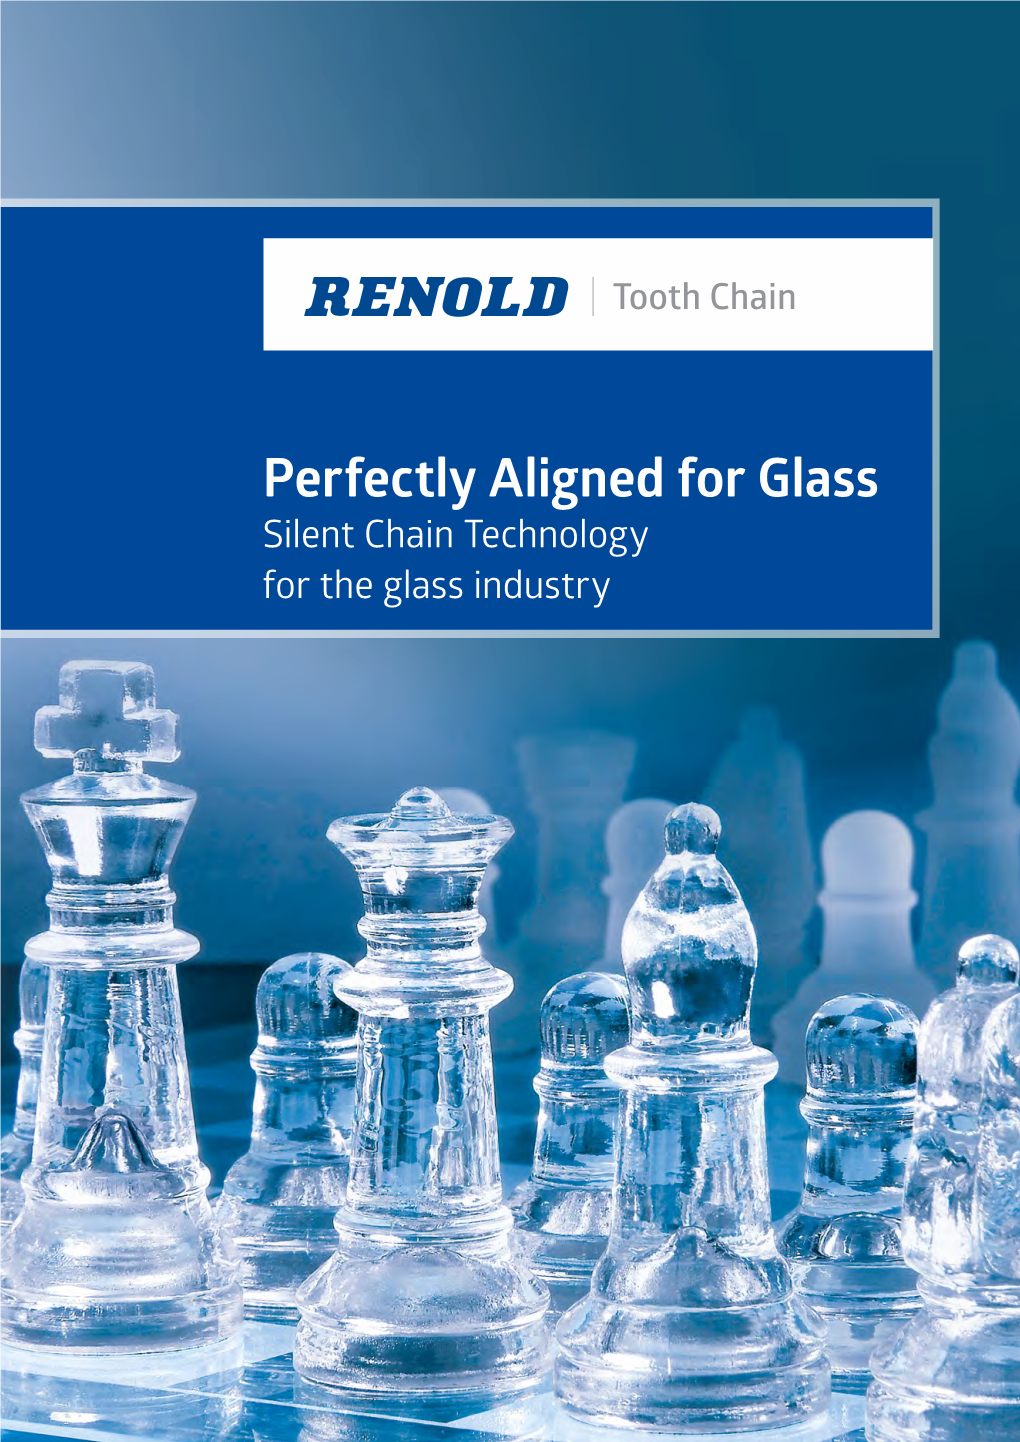 Perfectly Aligned for Glass Silent Chain Technology for the Glass Industry 2 Inverted Tooth Chains for the Glass Industry I Expertise